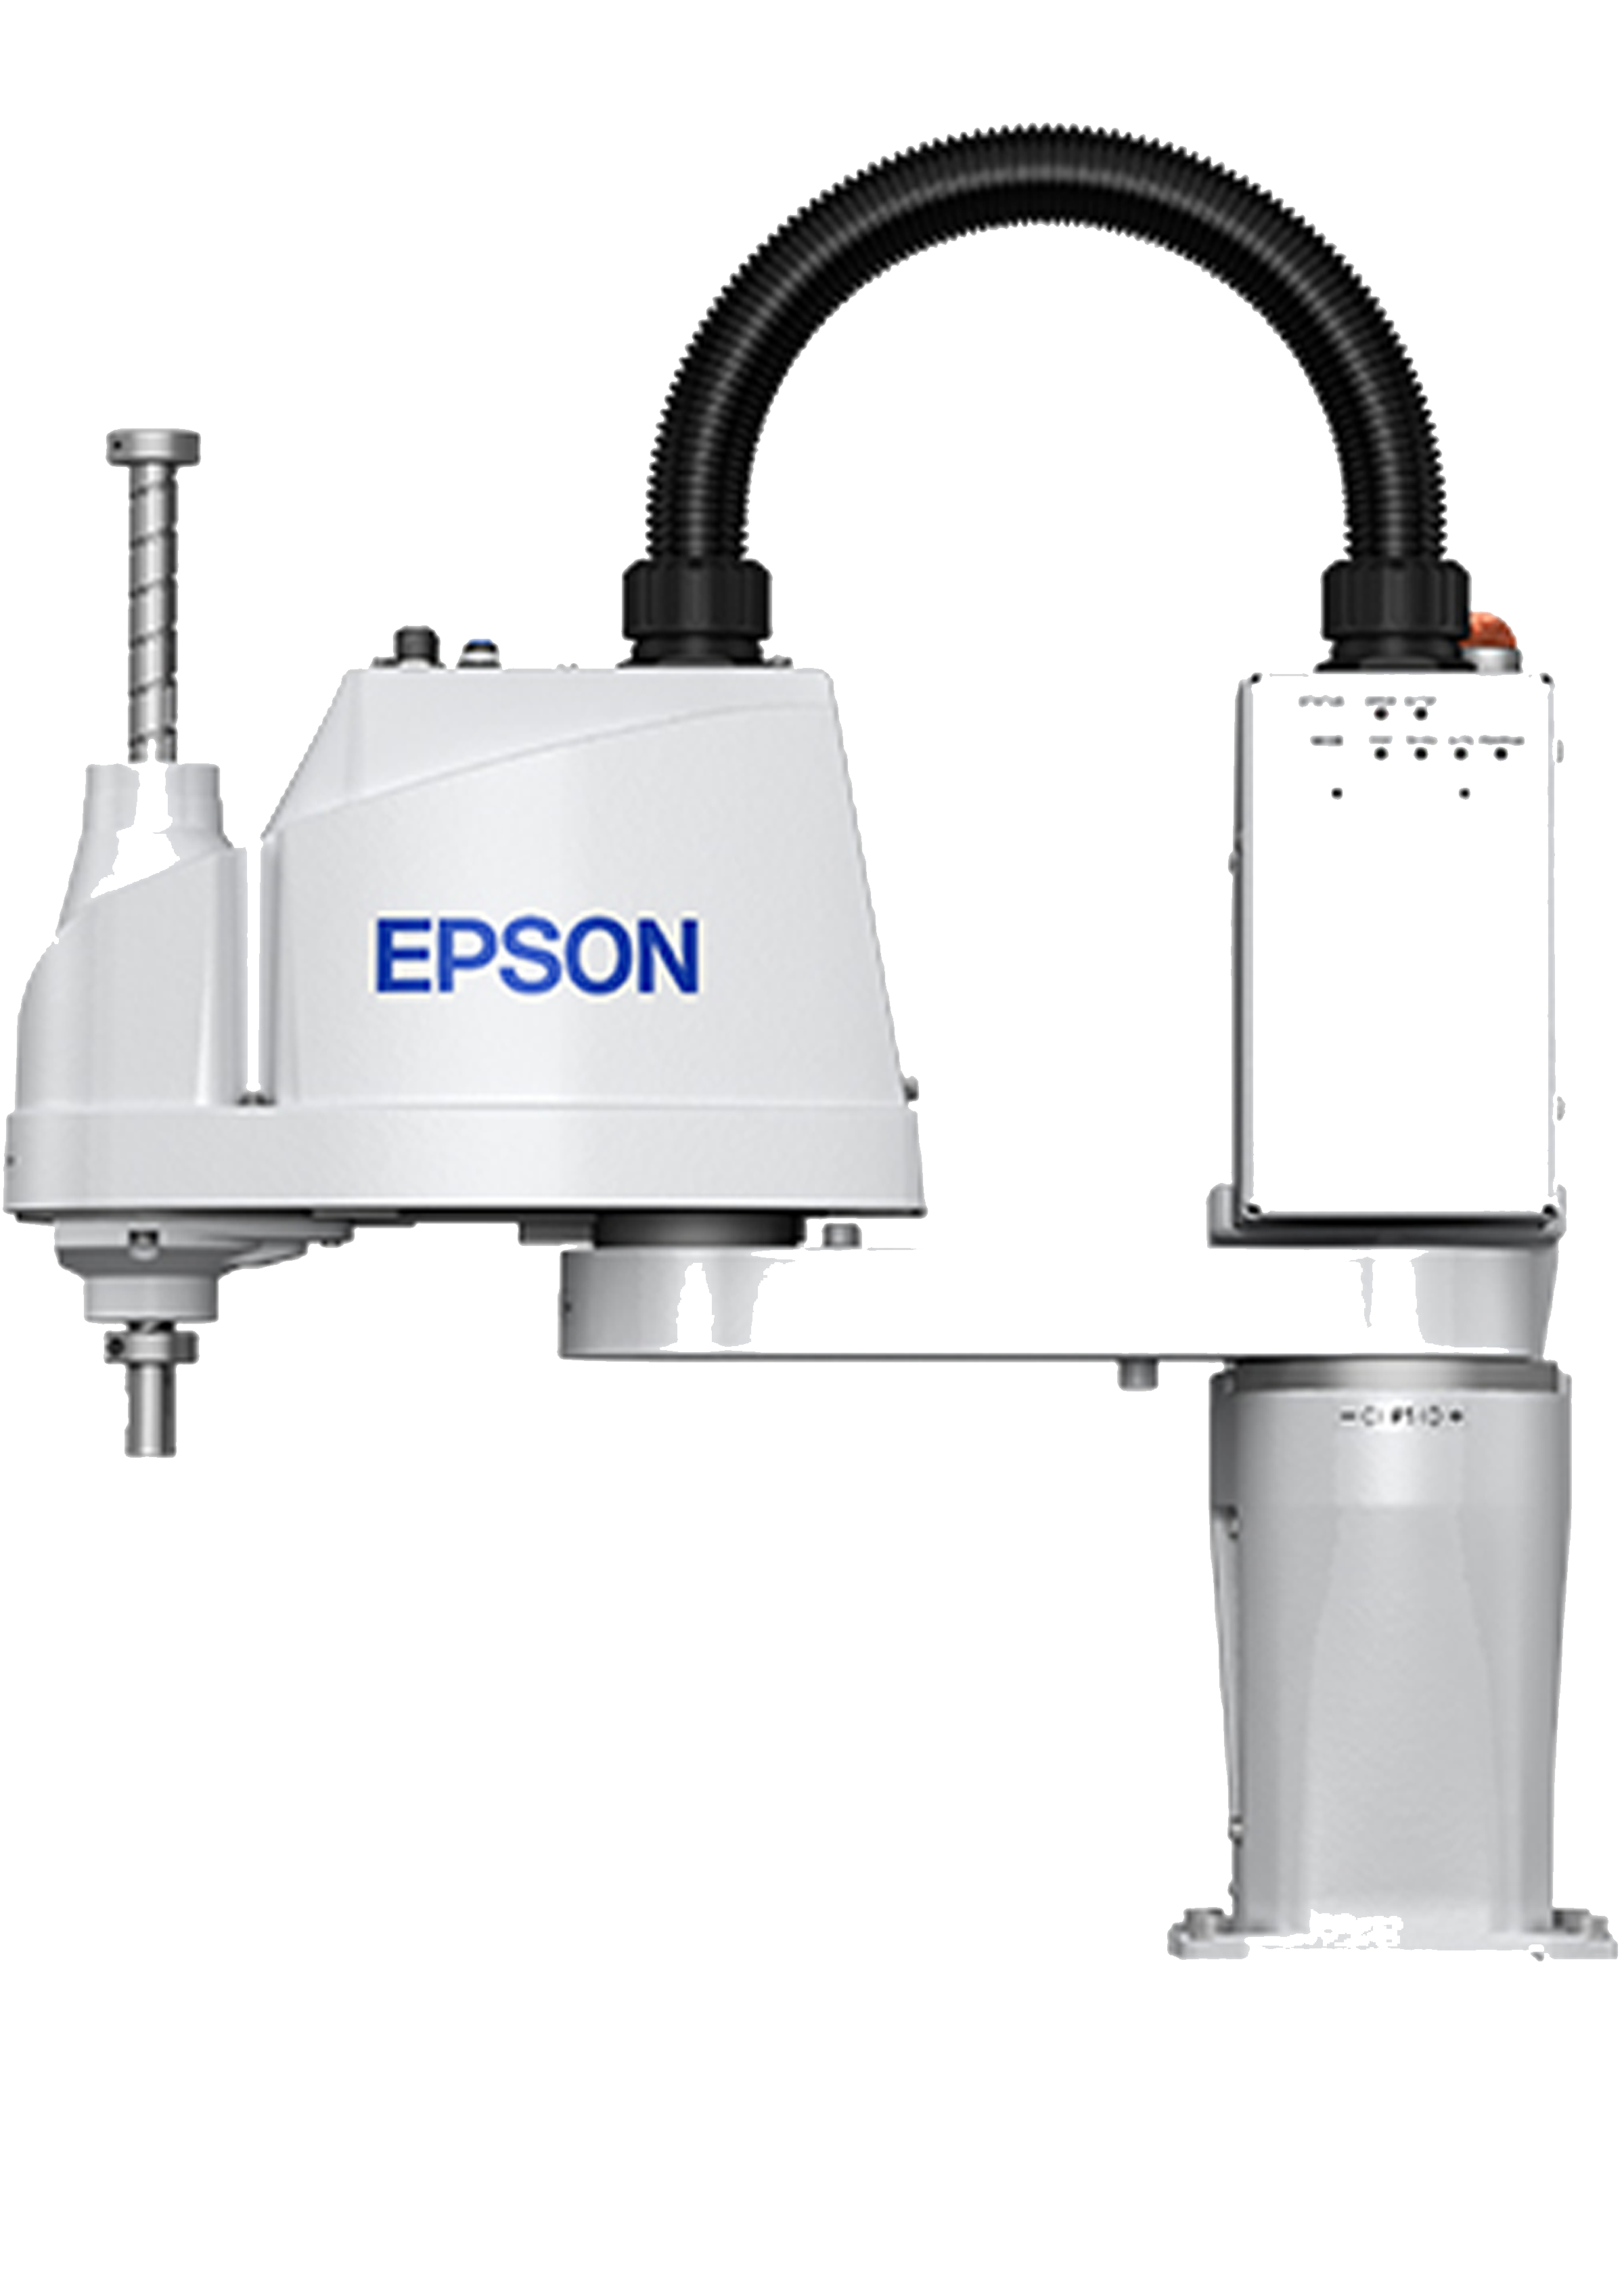 Schneider & Company - A modern epson industrial robotic arm with a white and blue color scheme, featuring a compact design and modular construction, likely used for precision tasks in manufacturing or assembly processes.